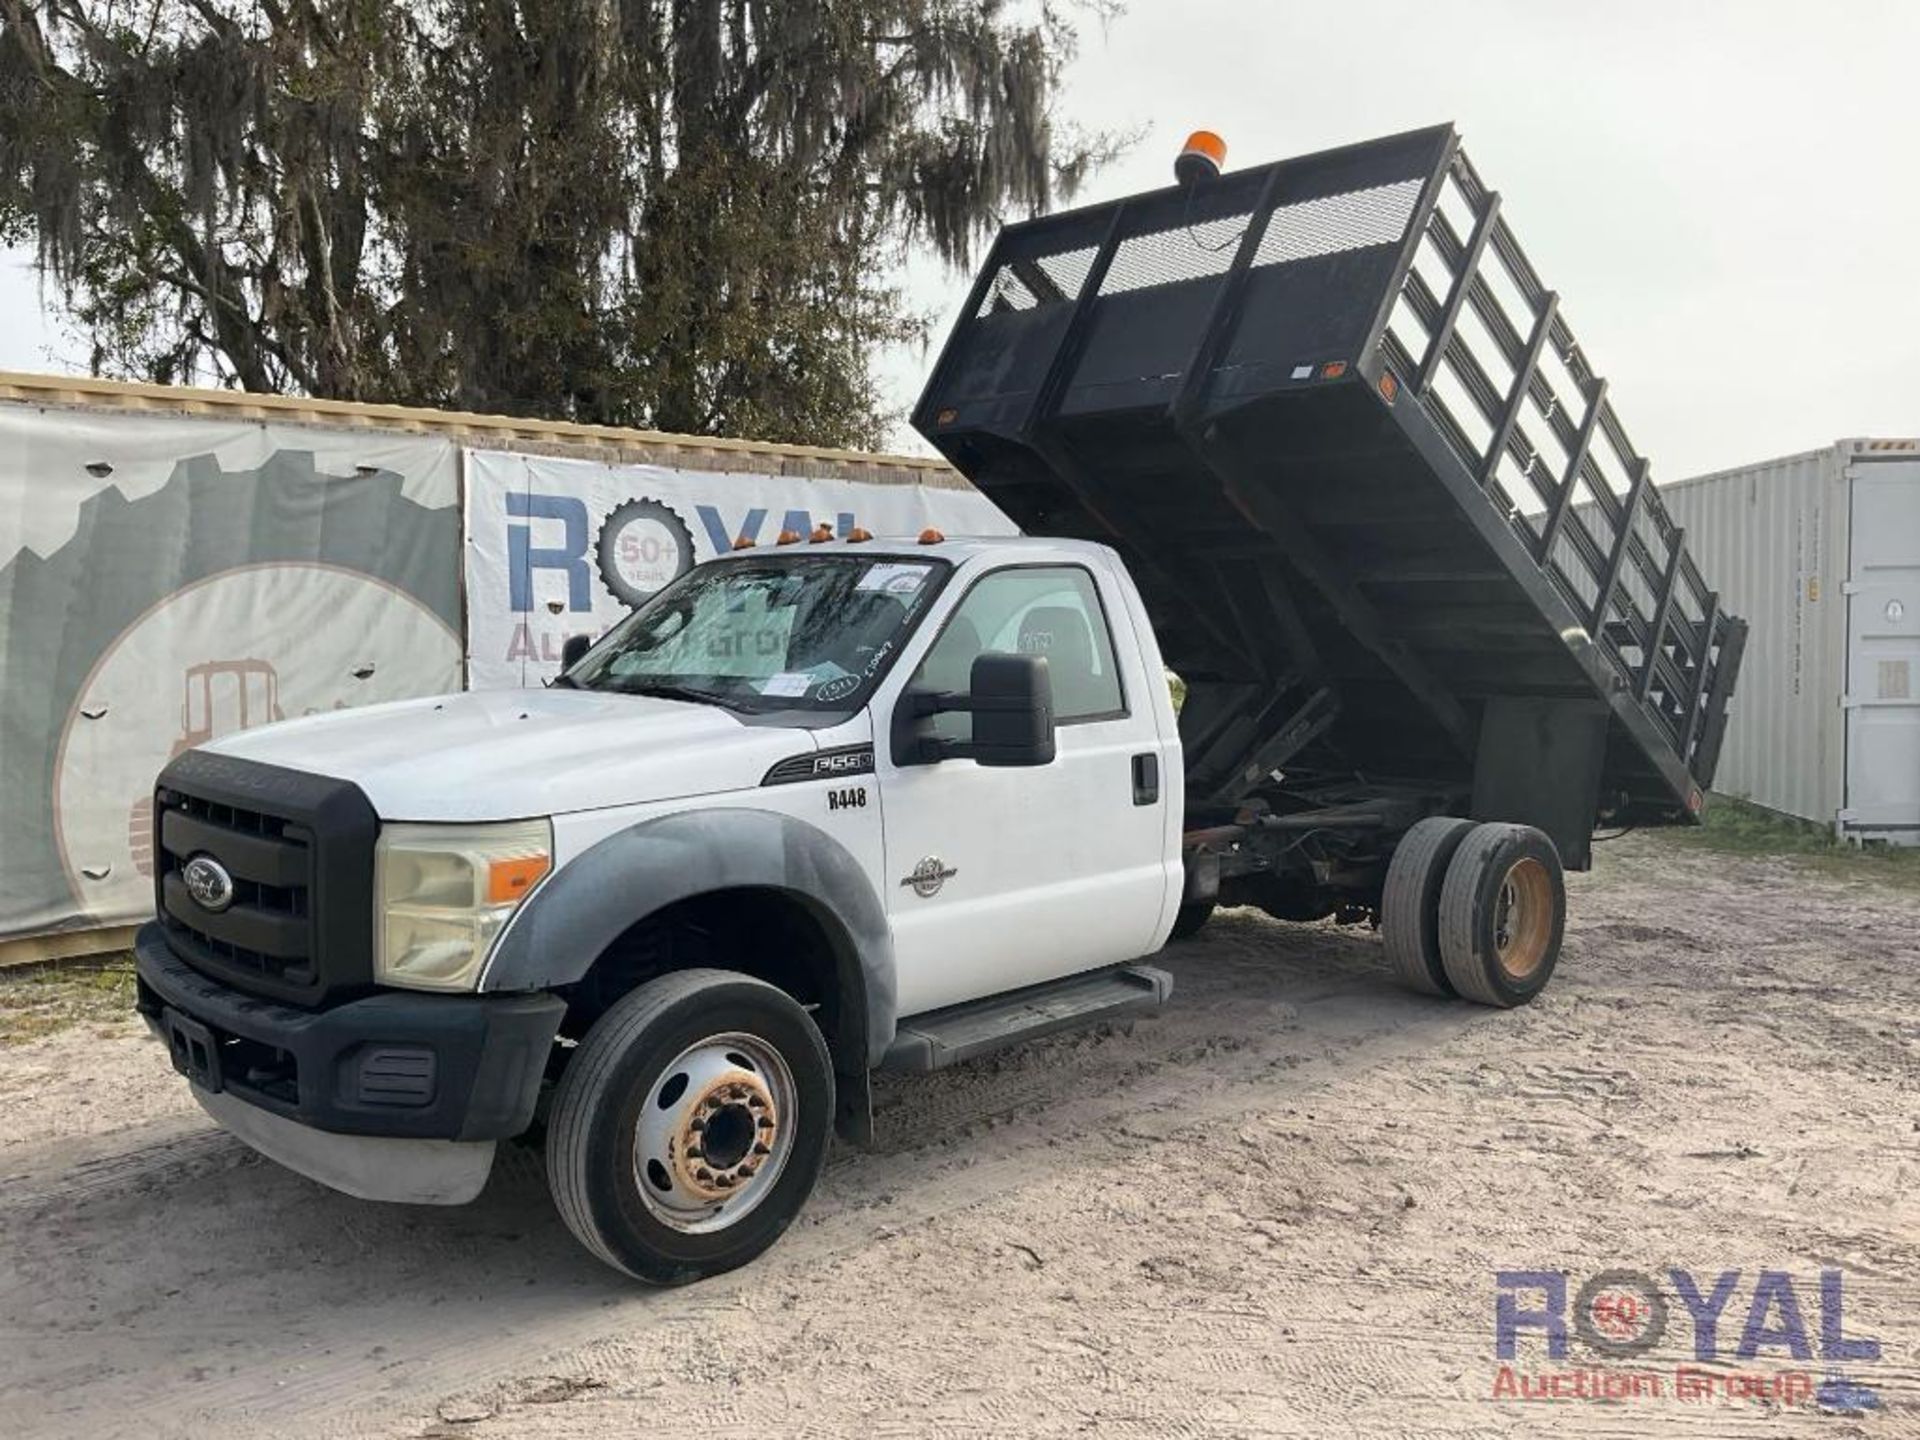 2011 Ford F550 Super Duty Stakebody Flatbed Dump Truck